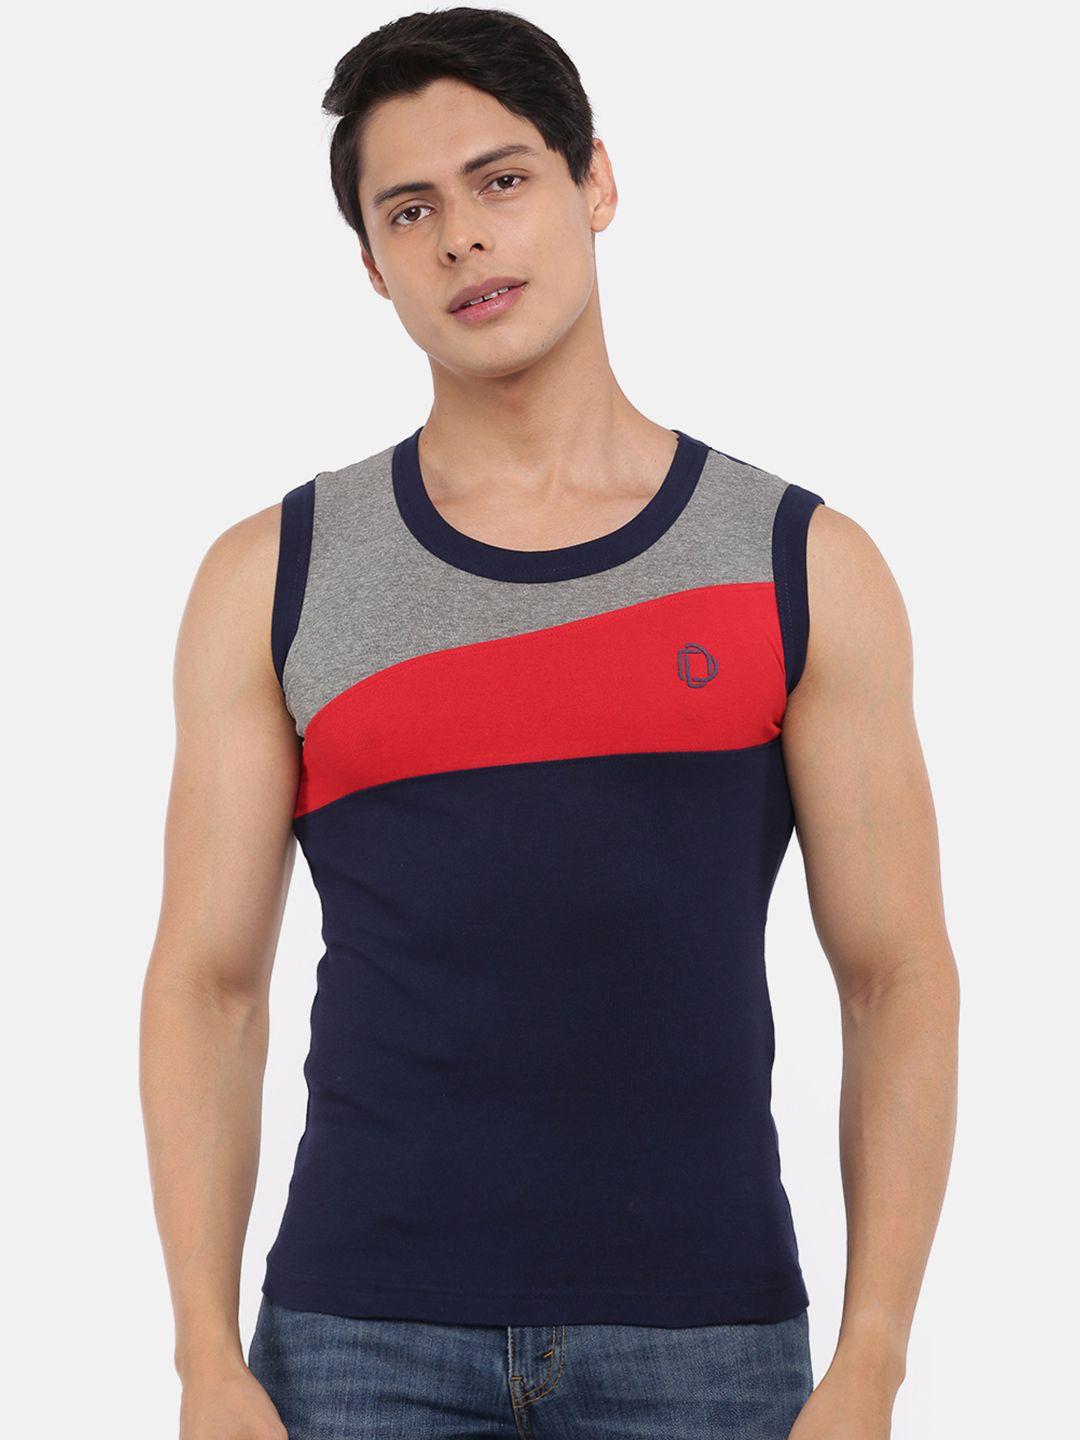 dollar bigboss assorted ribbed cotton racerback styled gym vest mbb-13-po1-co5-s24